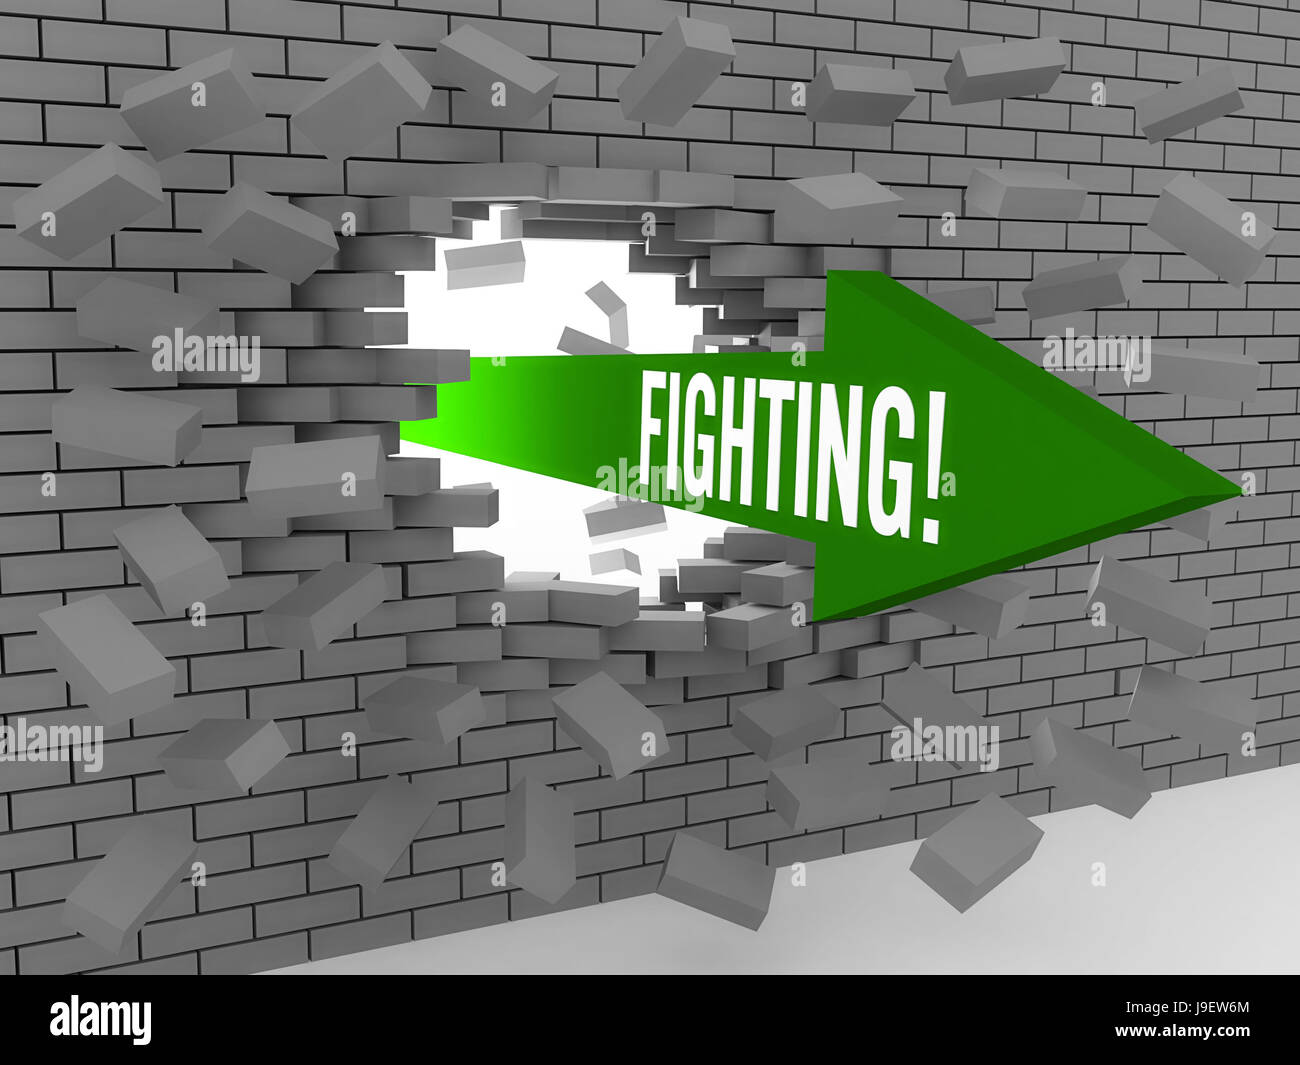 Arrow with word Fighting breaking brick wall. Concept 3D illustration. Stock Photo